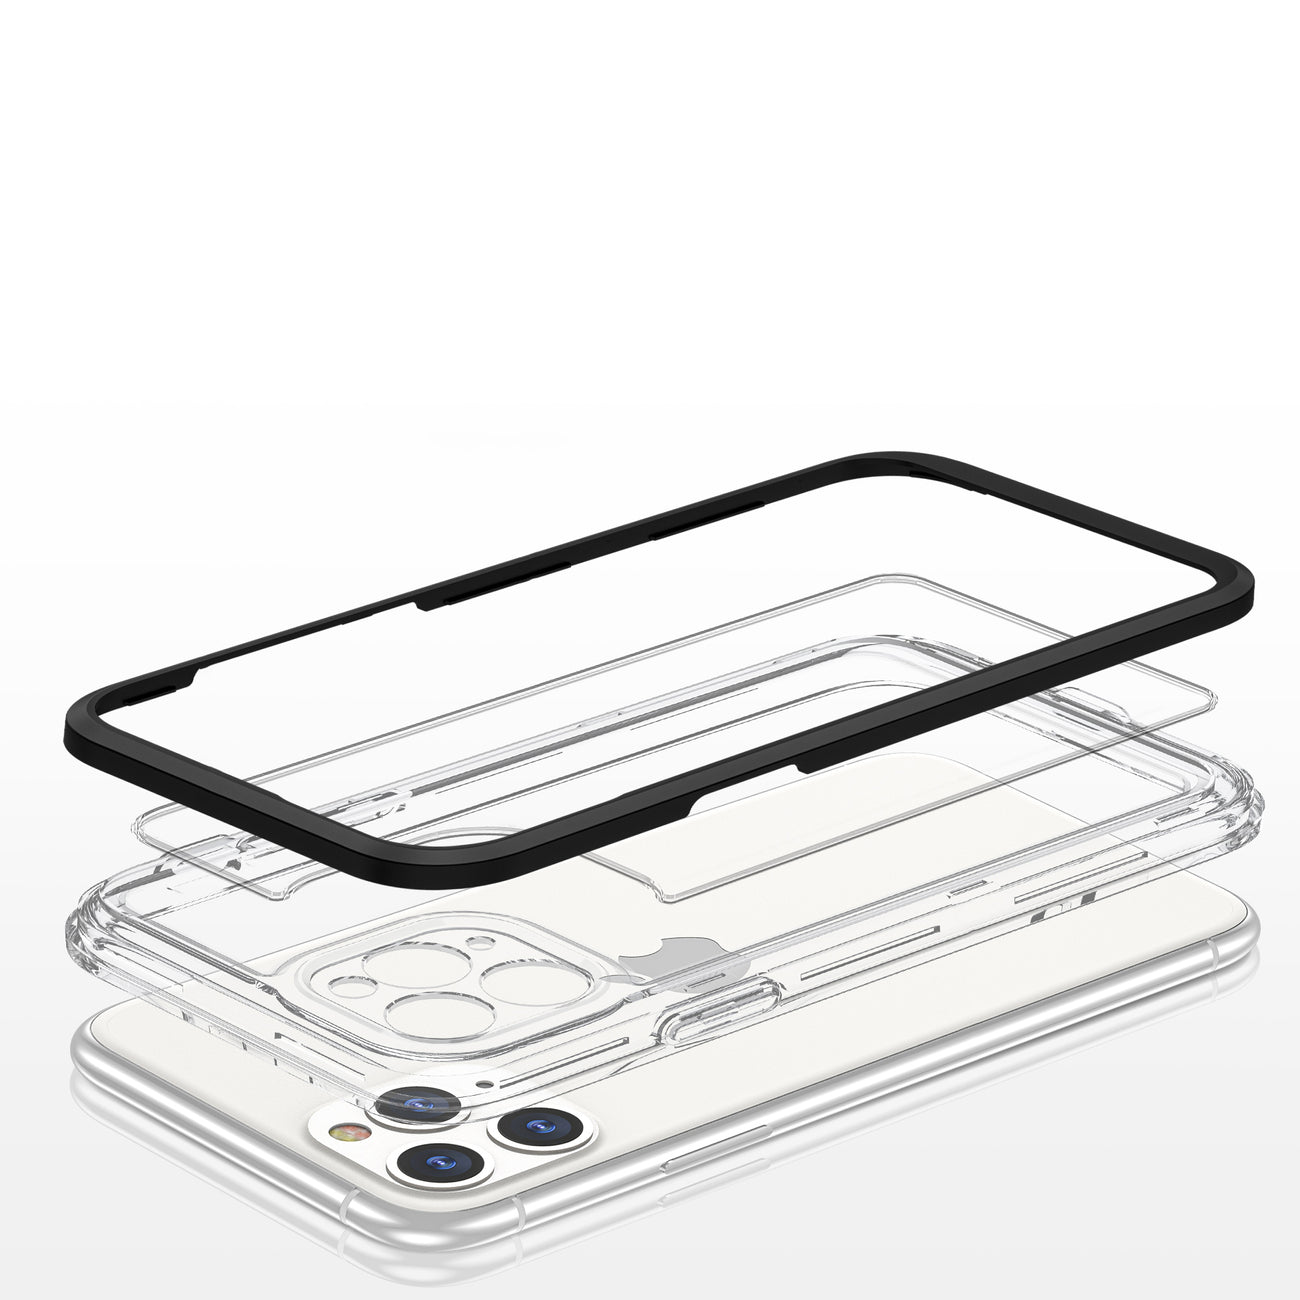 Clear 3in1 case for iPhone 11 Pro Max case gel cover with frame black